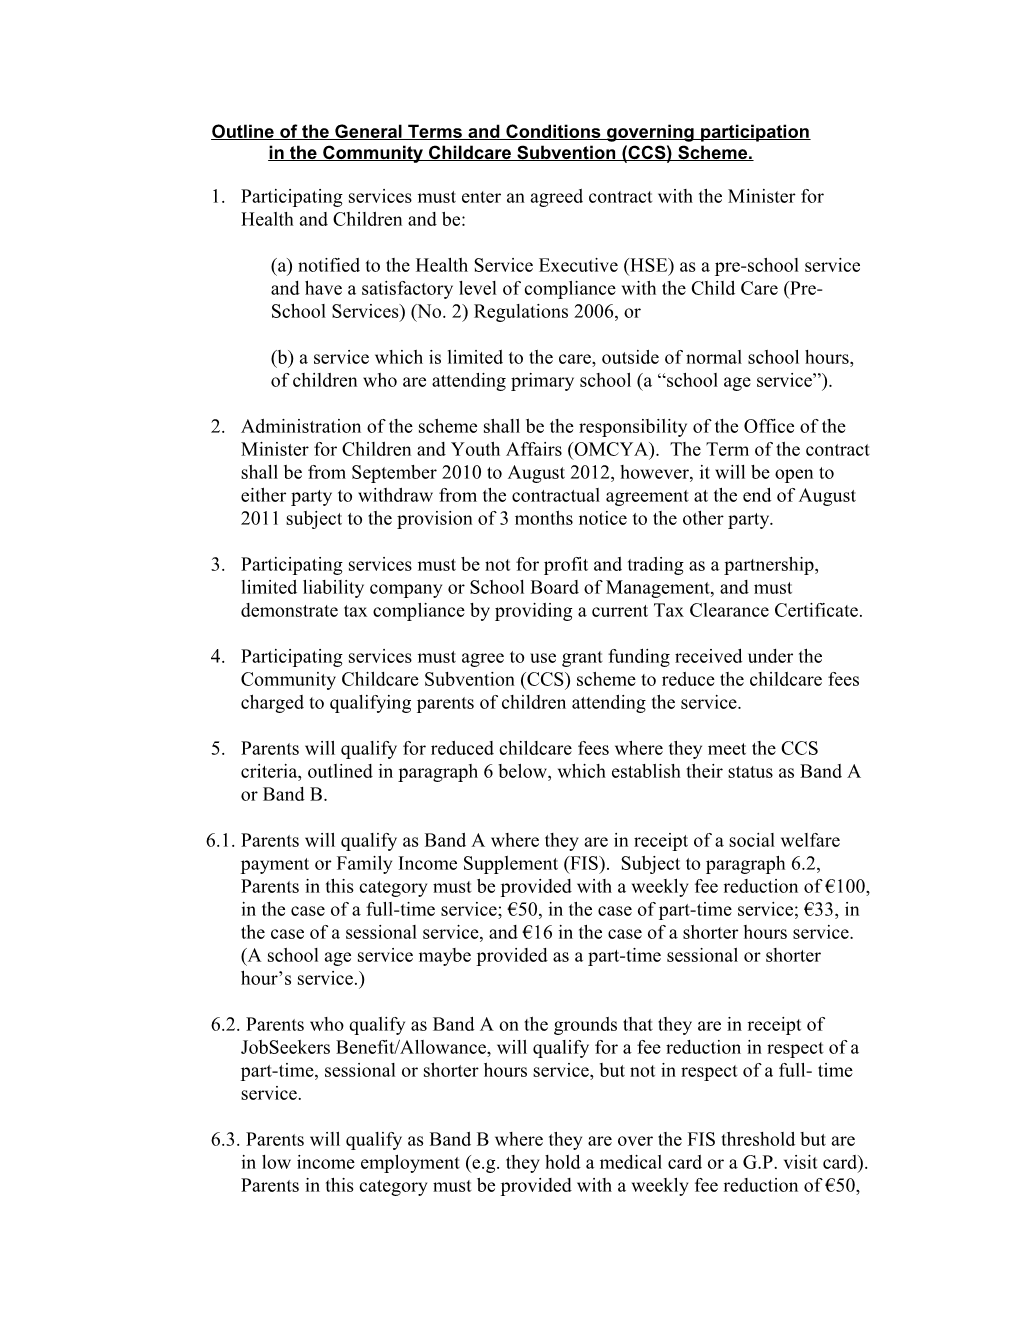 Outline of the General Terms and Conditions Governing Participation